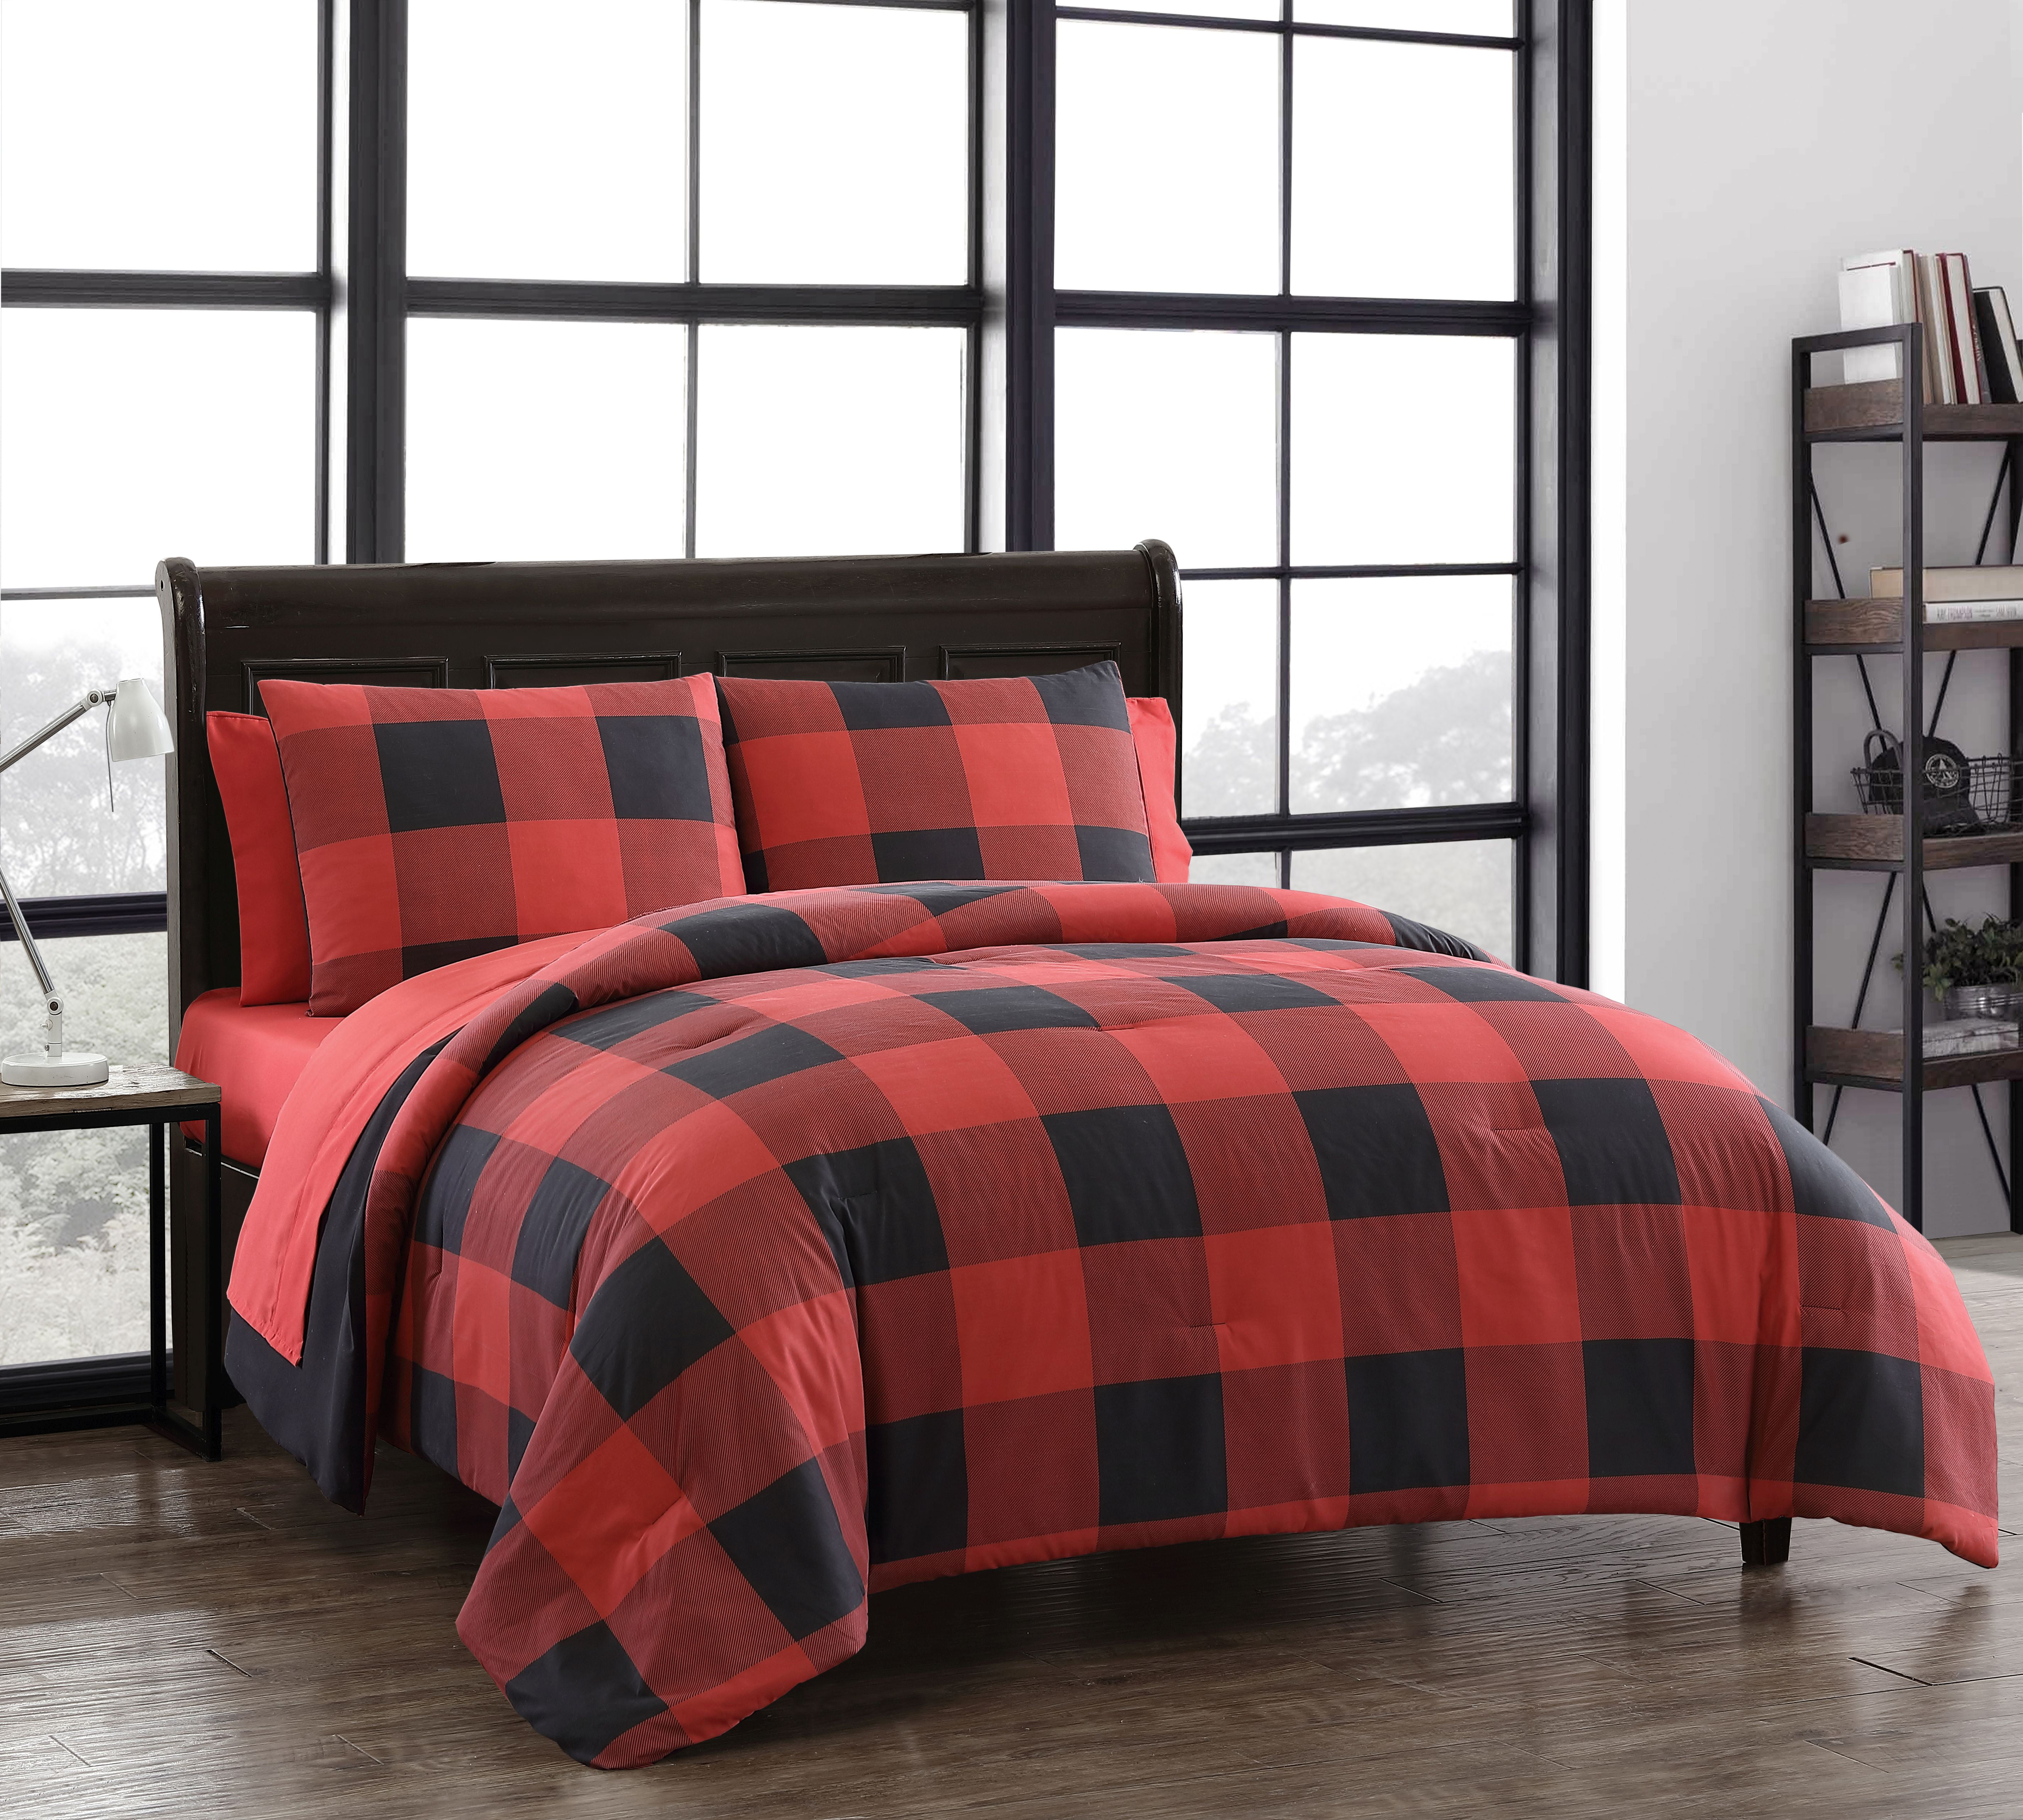 Buffalo Plaid Red 4 pc Queen Sheets and Pillow Cases Set Bear Country Microfiber